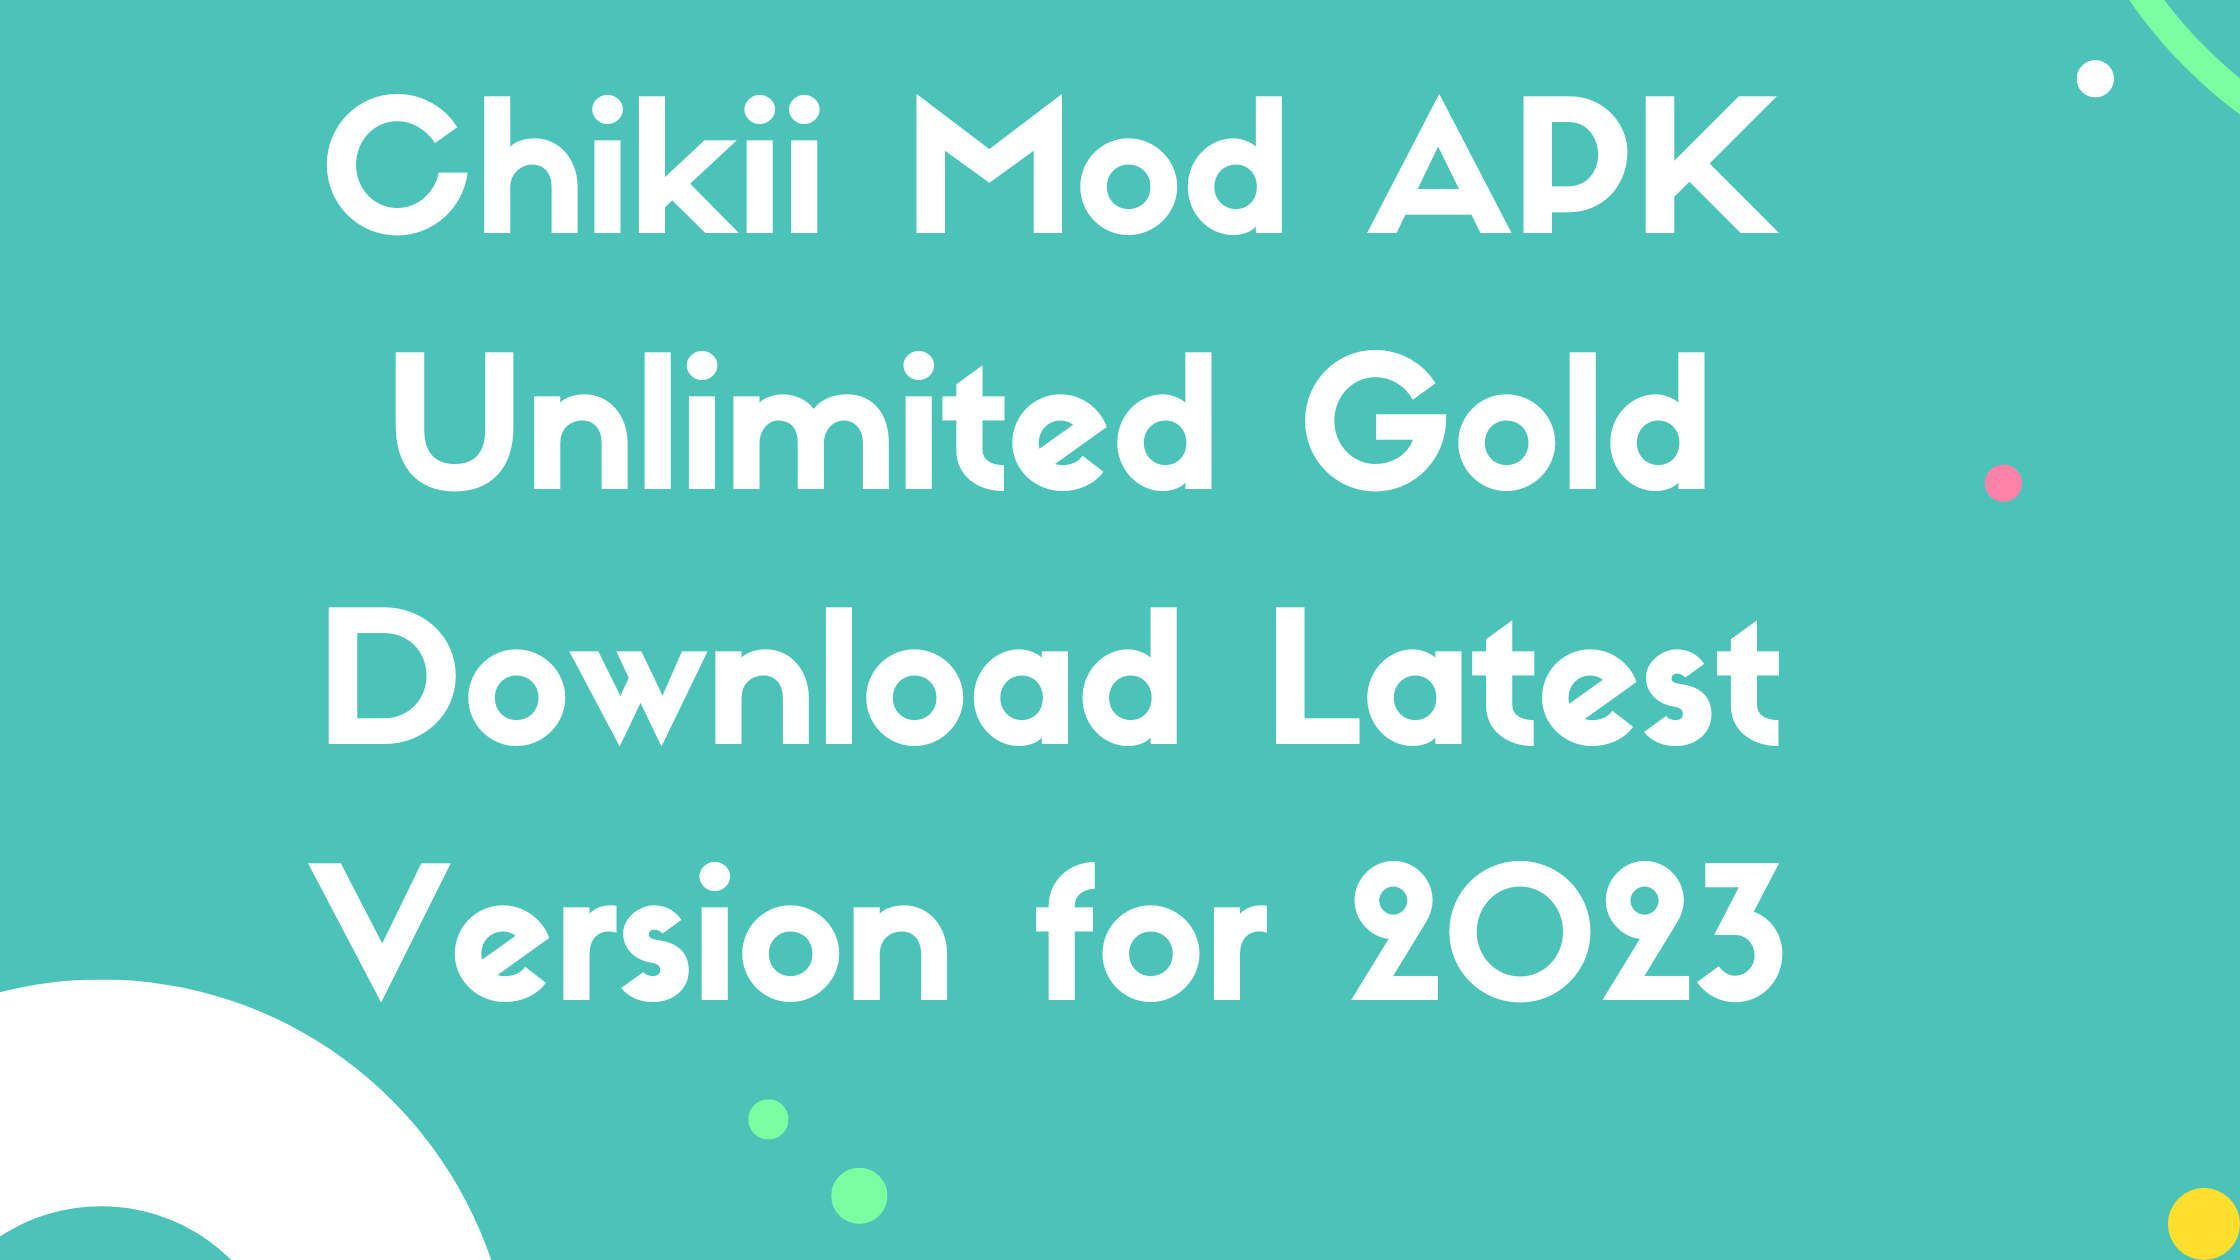 Chikii Mod APK Unlimited Gold Download Latest Version for 2023